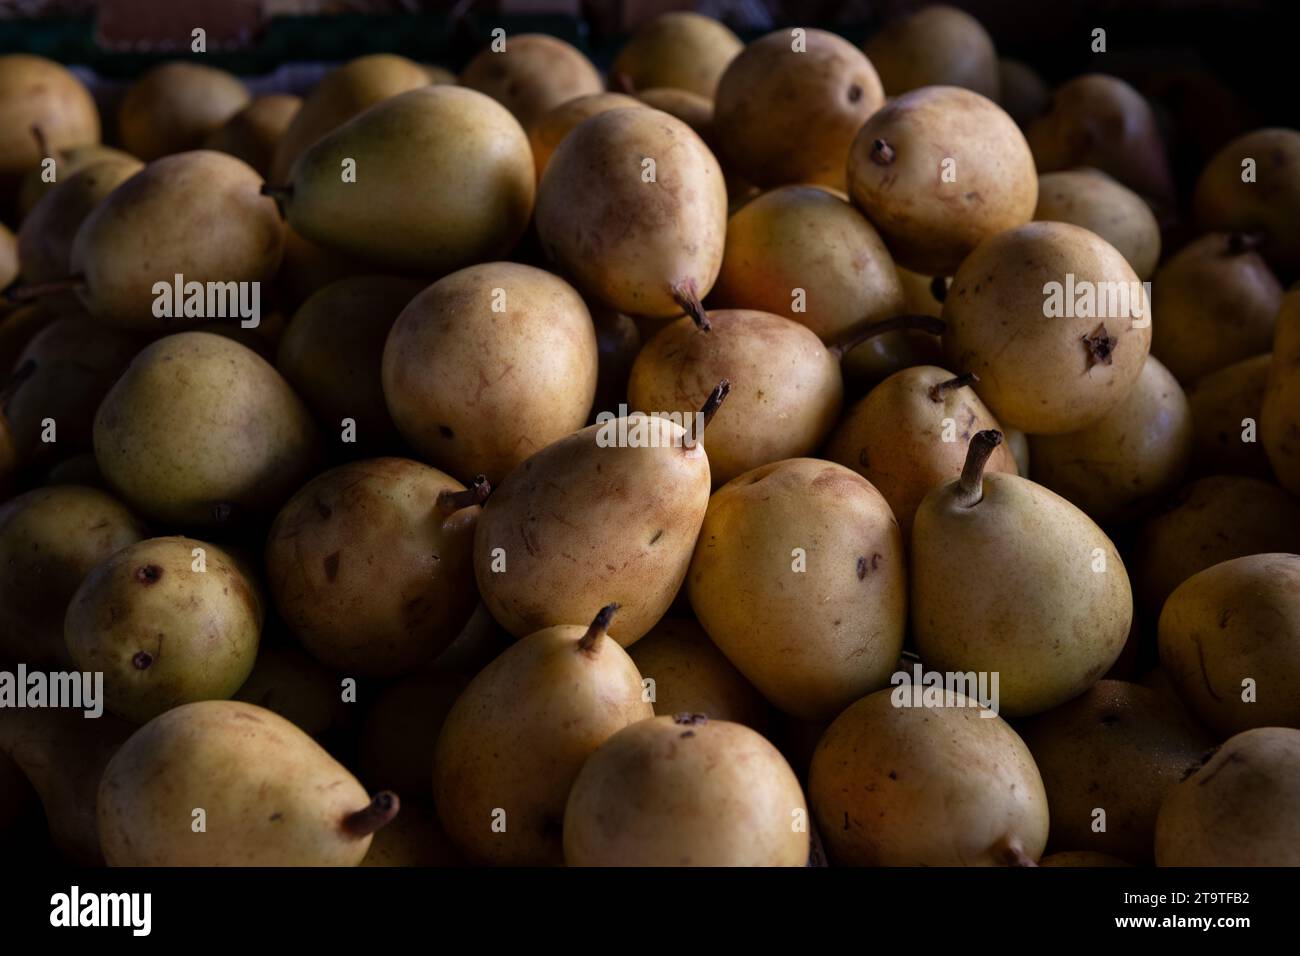 A basket of freshly harvested, ripe, golden pears at an outdoor farmer's market in Florence, Italy. Stock Photo